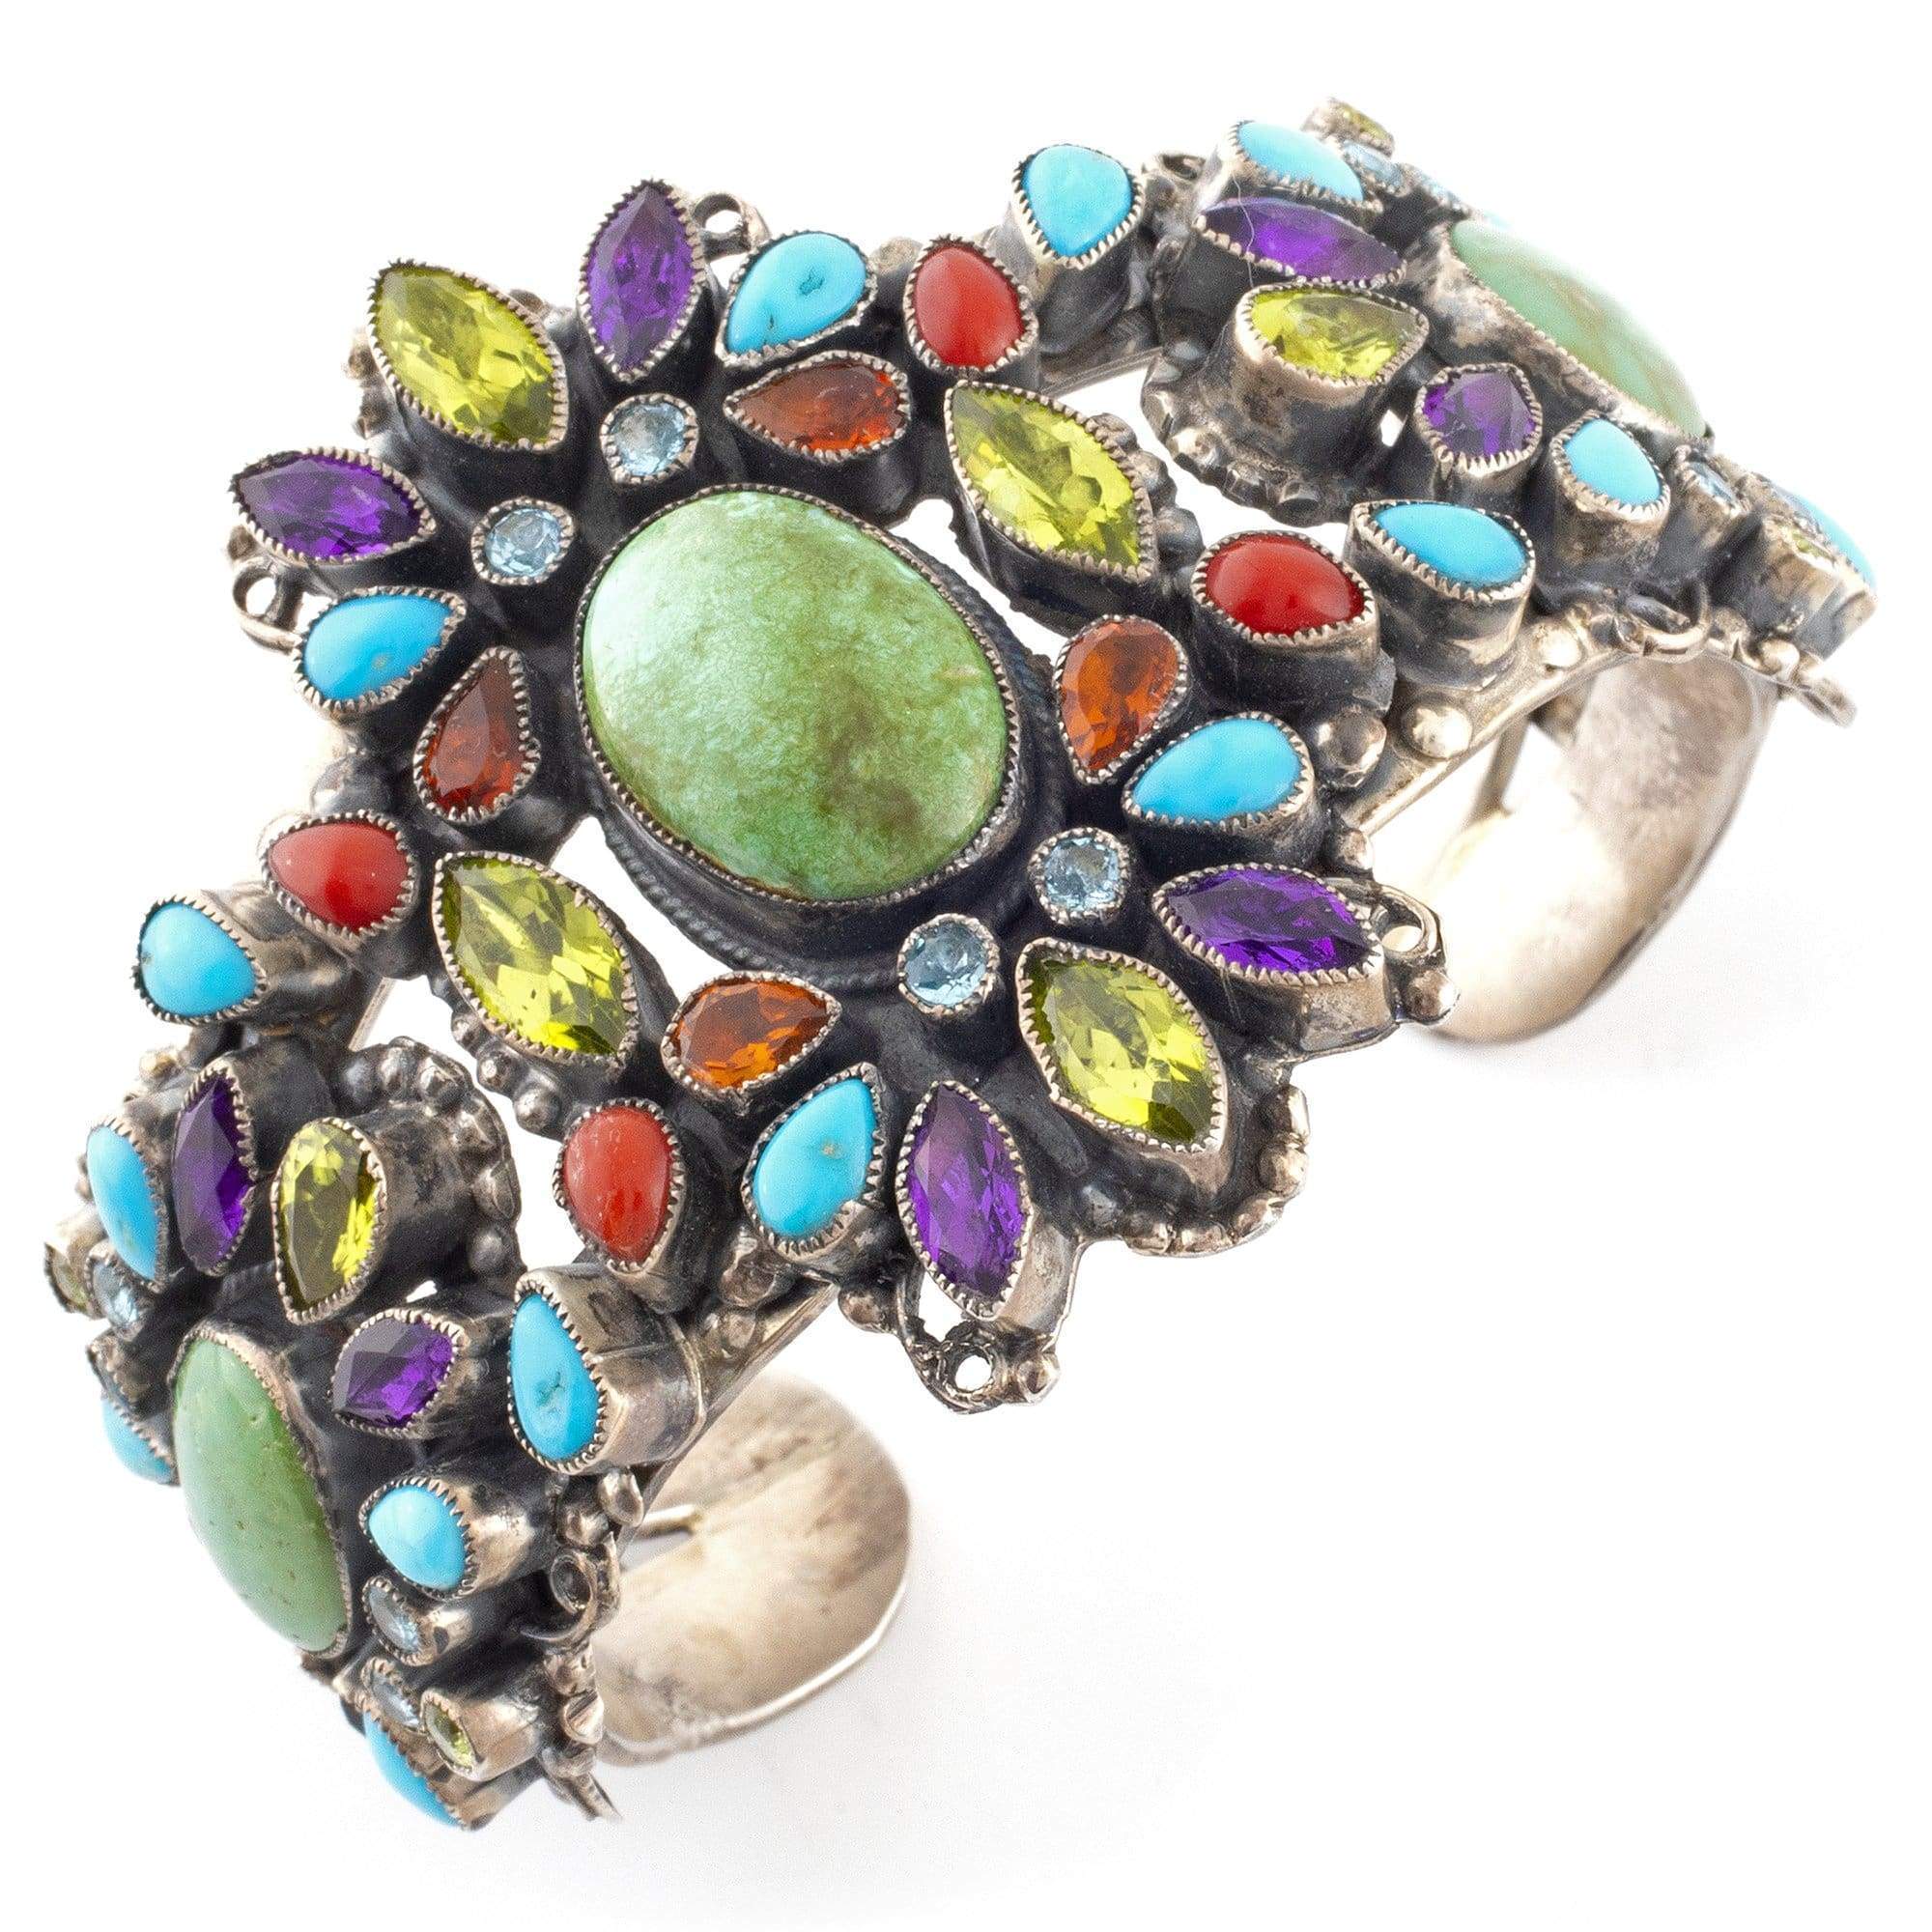 Kalifano Native American Jewelry Leo  Feeney Royston Turquoise with Amethyst and Peridot USA Native American Made 925 Sterling Silver Cuff NAB5400.001